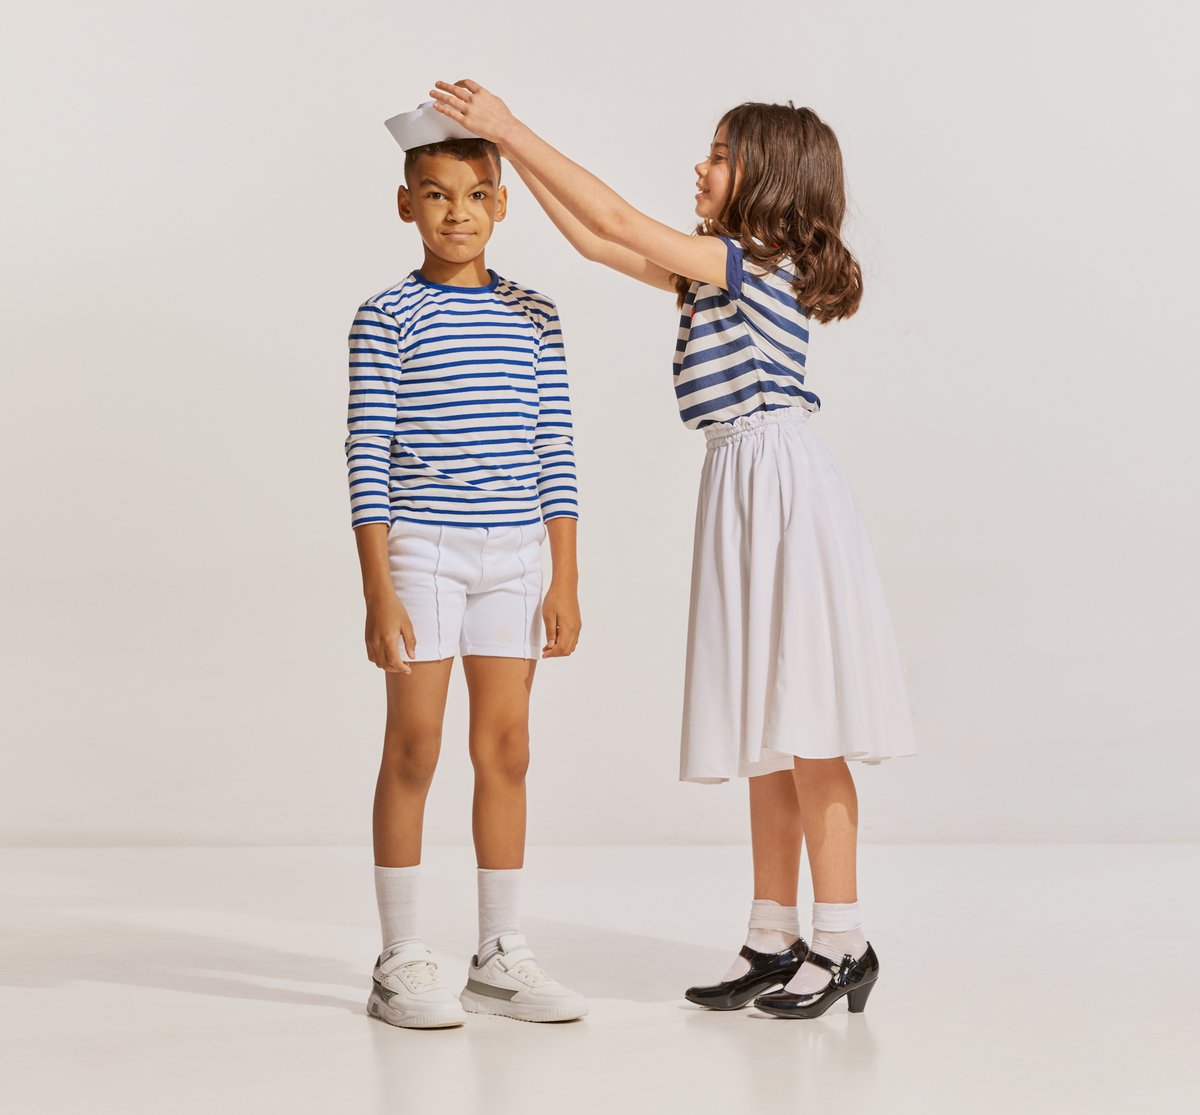 The Ultimate Guide to Your Kids’ Summer Wardrobe: 10 Key Items 

We’ve put together a list of 10 must-have pieces 
See them here: tinyurl.com/yc78k5ef 

#kidsfashion #summerclothes #summer #kidswear 
#kids #kidsshopping #kidsclothes